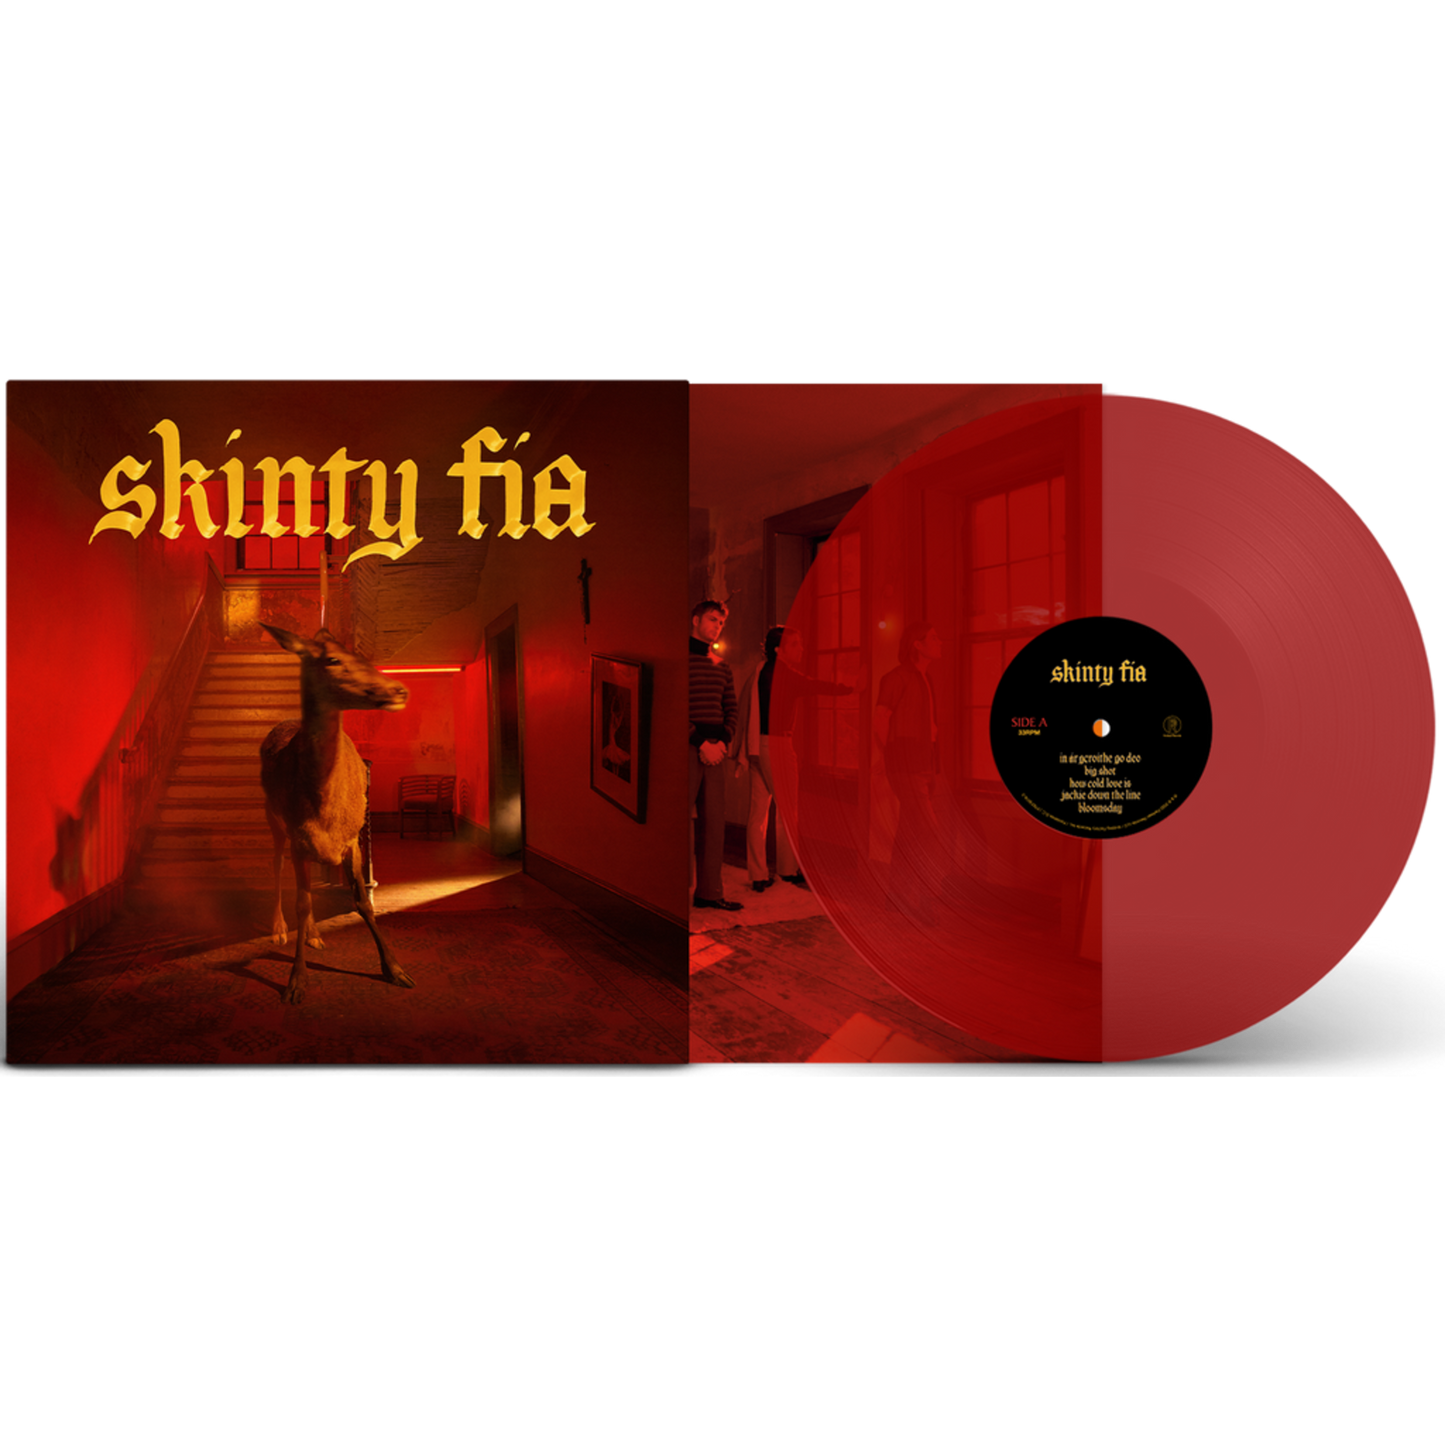 Fontaines D.C. - Skinty Fia (Opaque Red Vinyl)